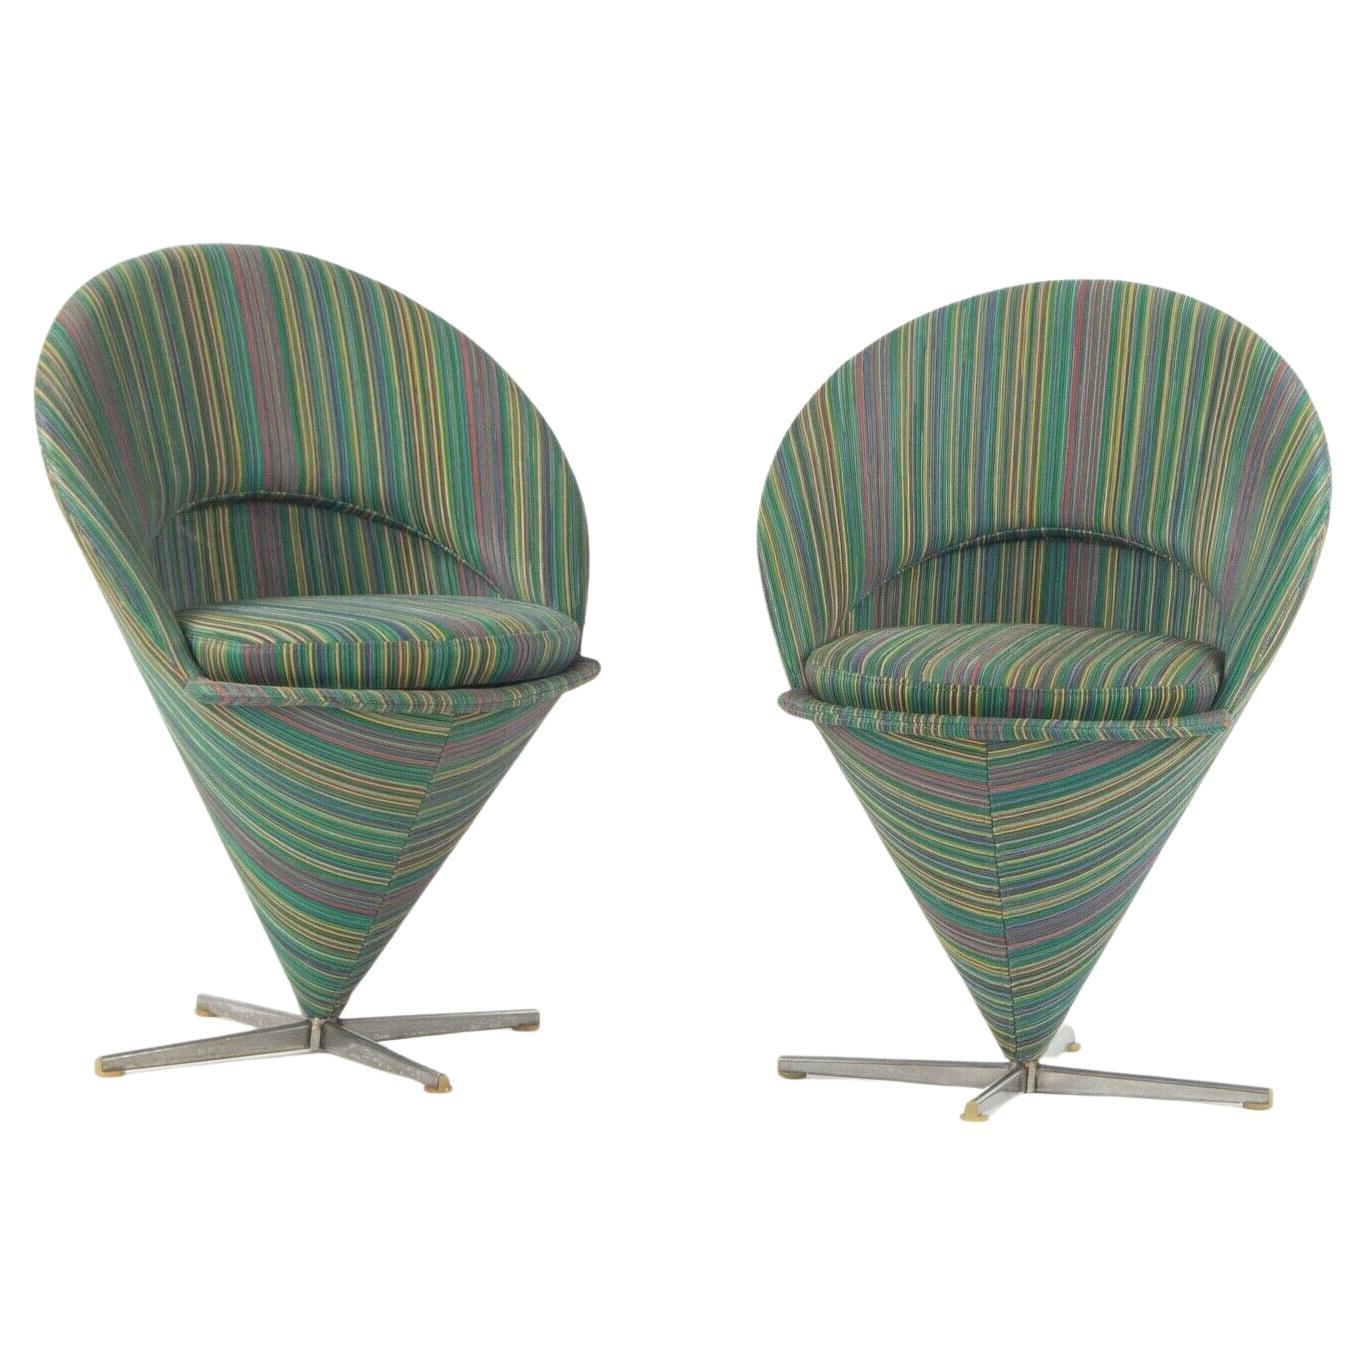 1960s Pair of Verner Panton Cone Chairs Made in Denmark for Plus-Linje Vitra